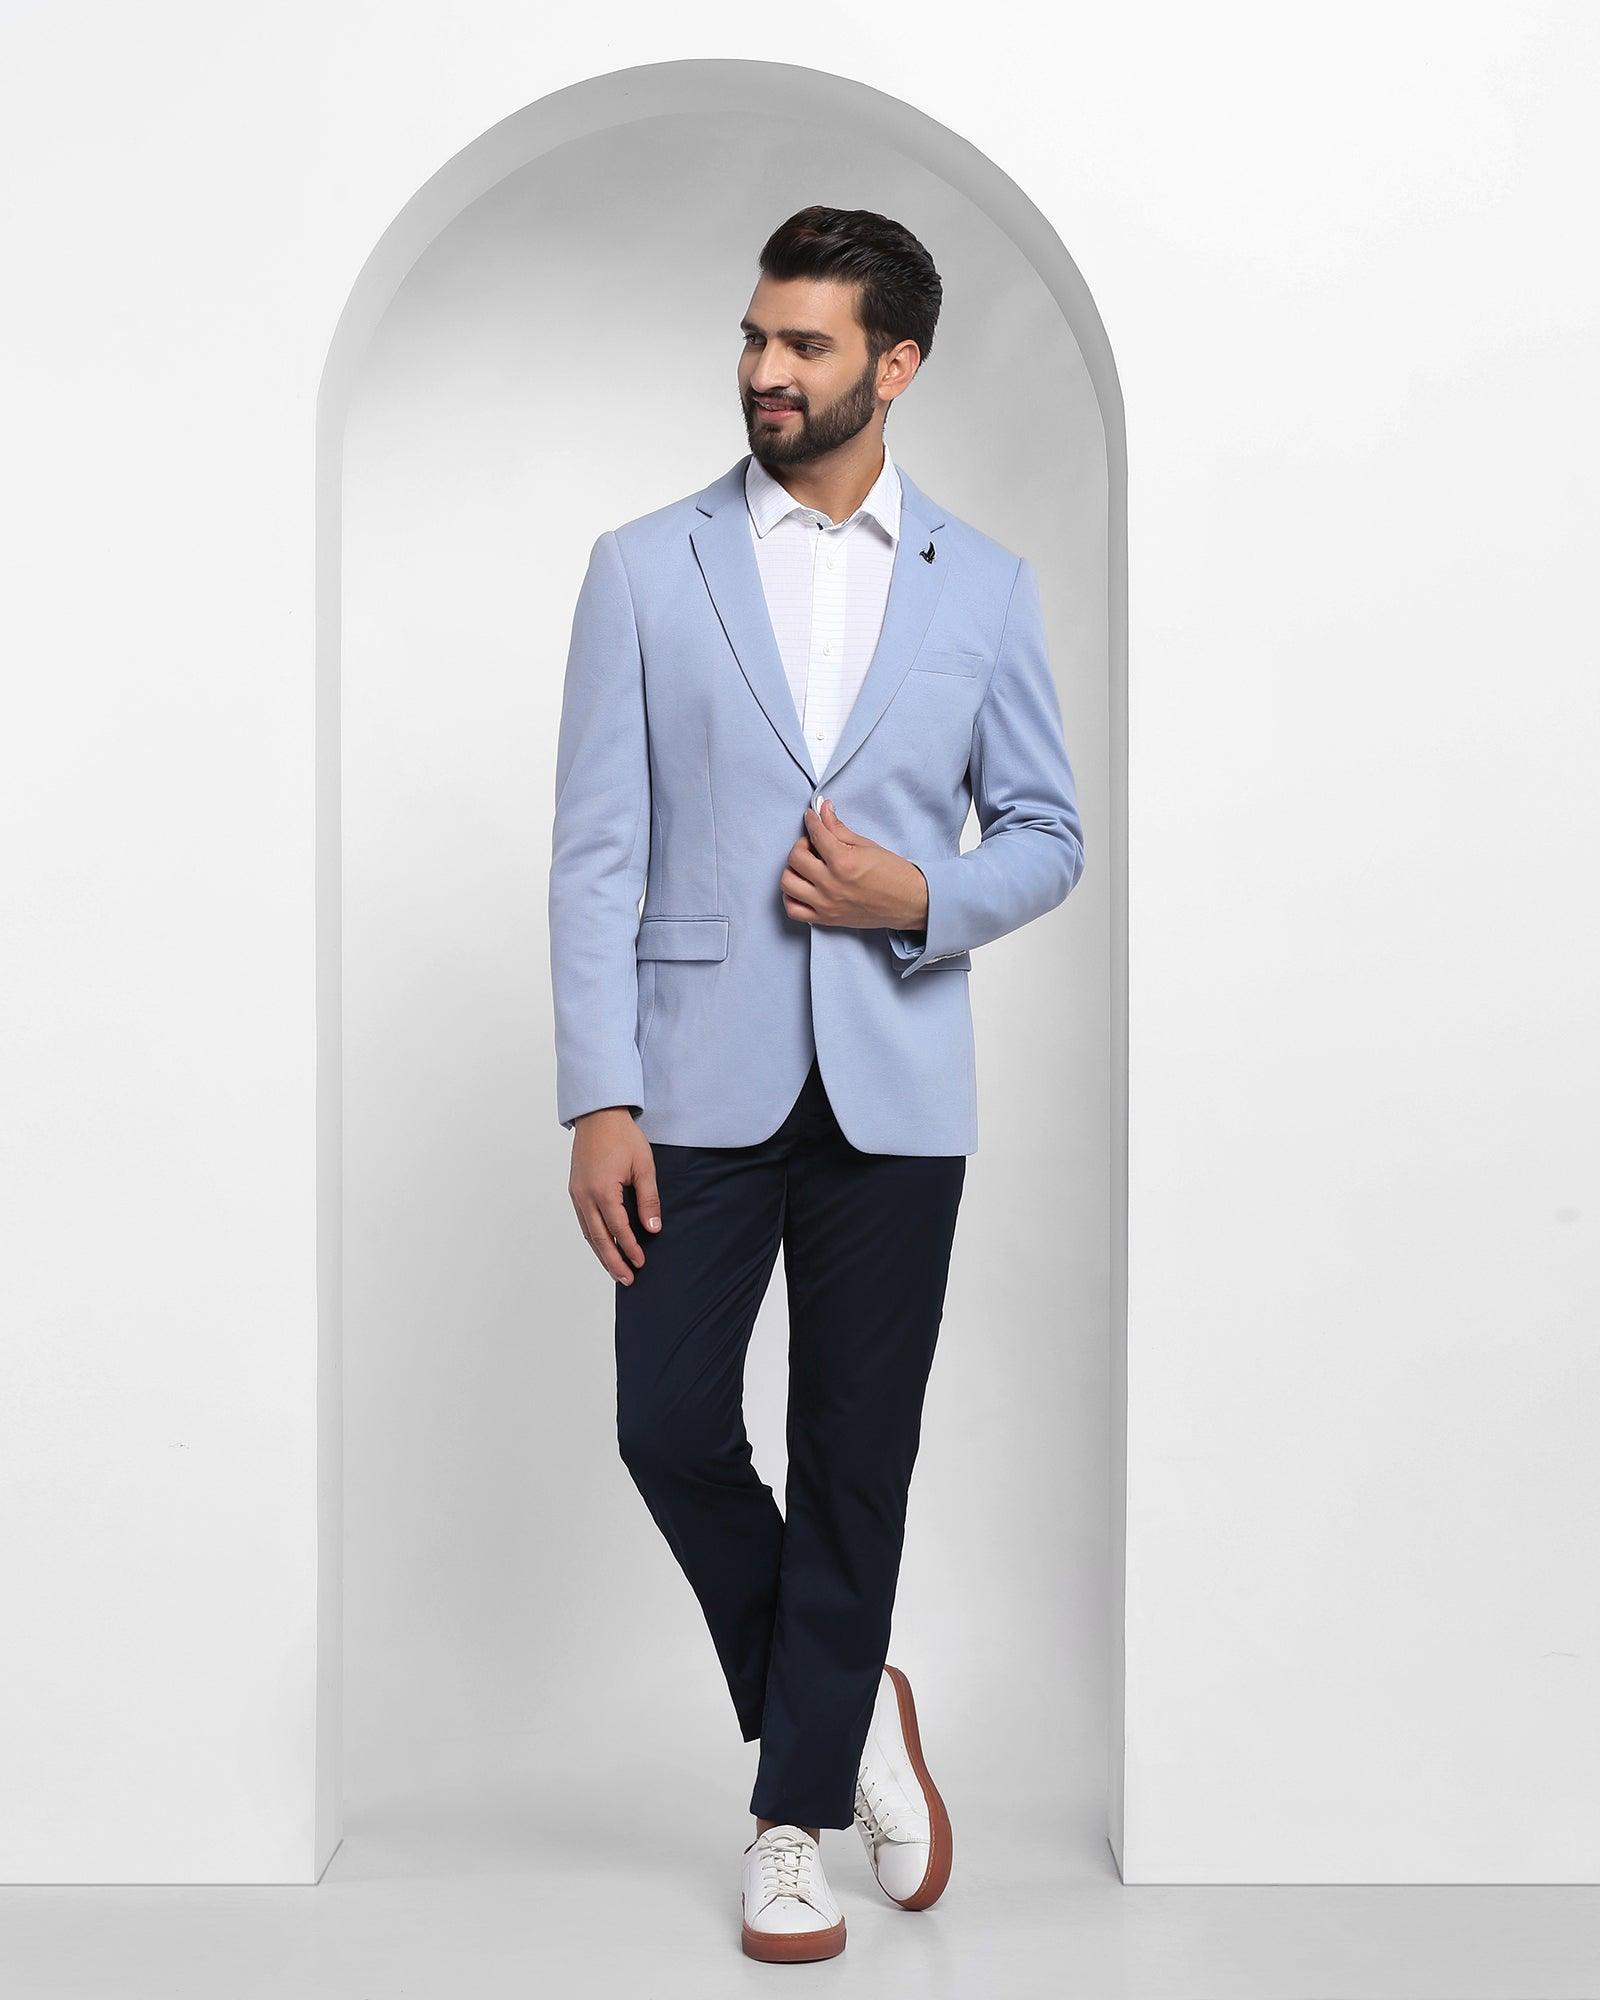 Buy MOGU Mens Navy Suit Regular Fit for Wedding Two Piece (Blazer + Trousers)  US Size Blazer 32/Pants 30 Navy Blue at Amazon.in